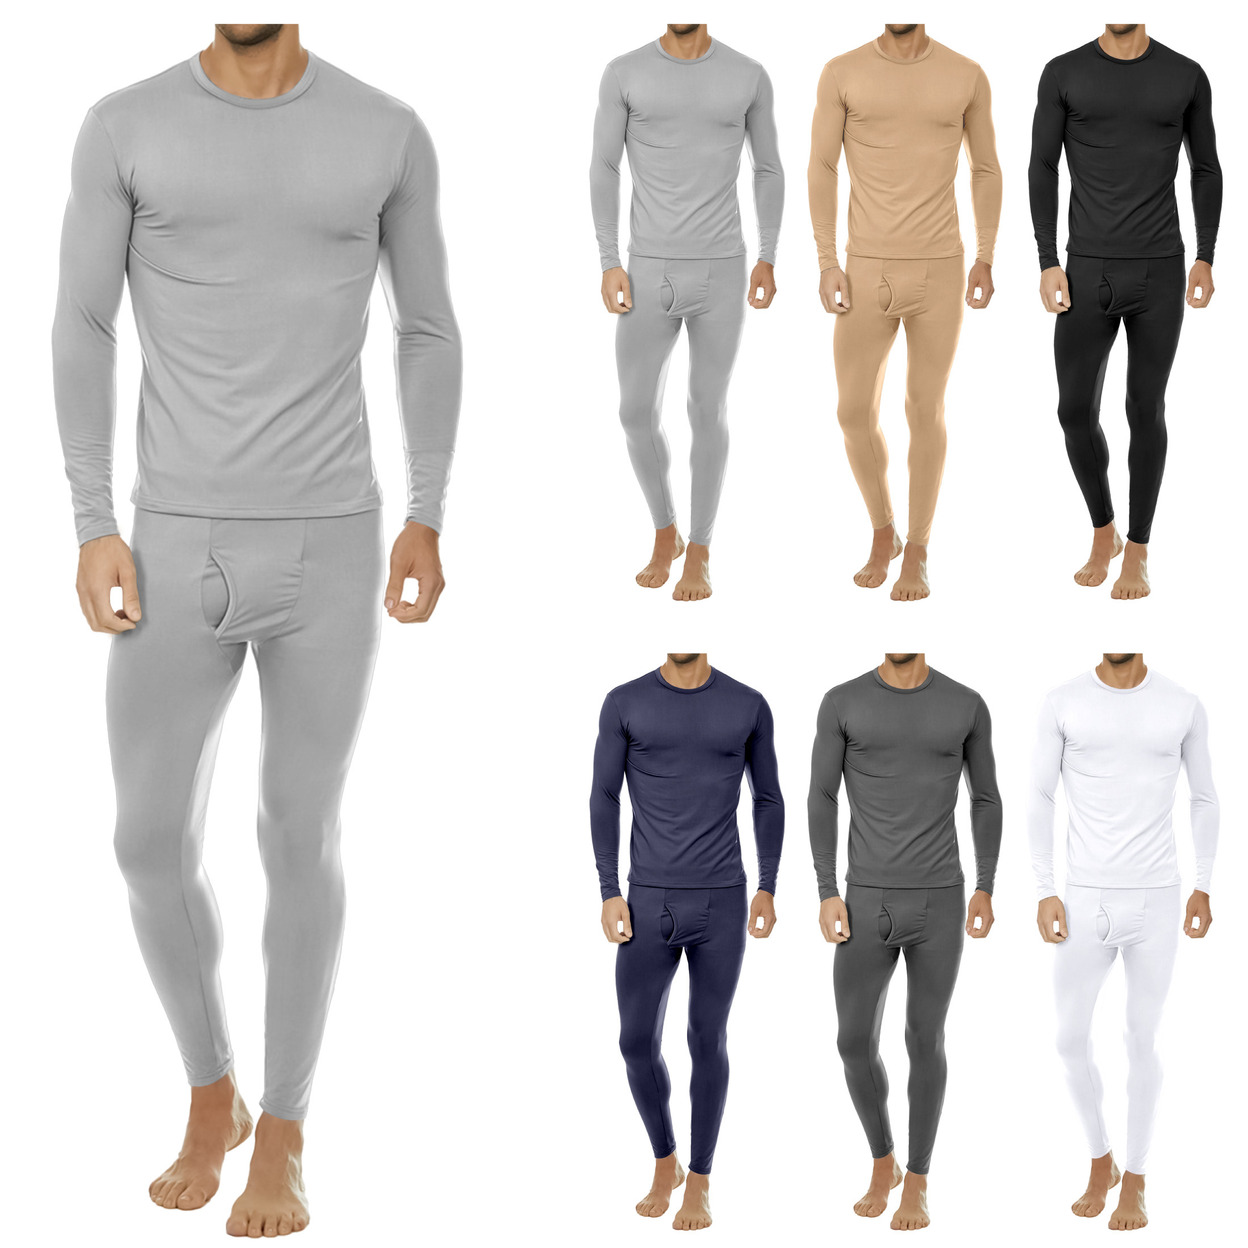 2-Sets: Men's Winter Warm Fleece Lined Thermal Underwear Set For Cold Weather - Black&white, Large